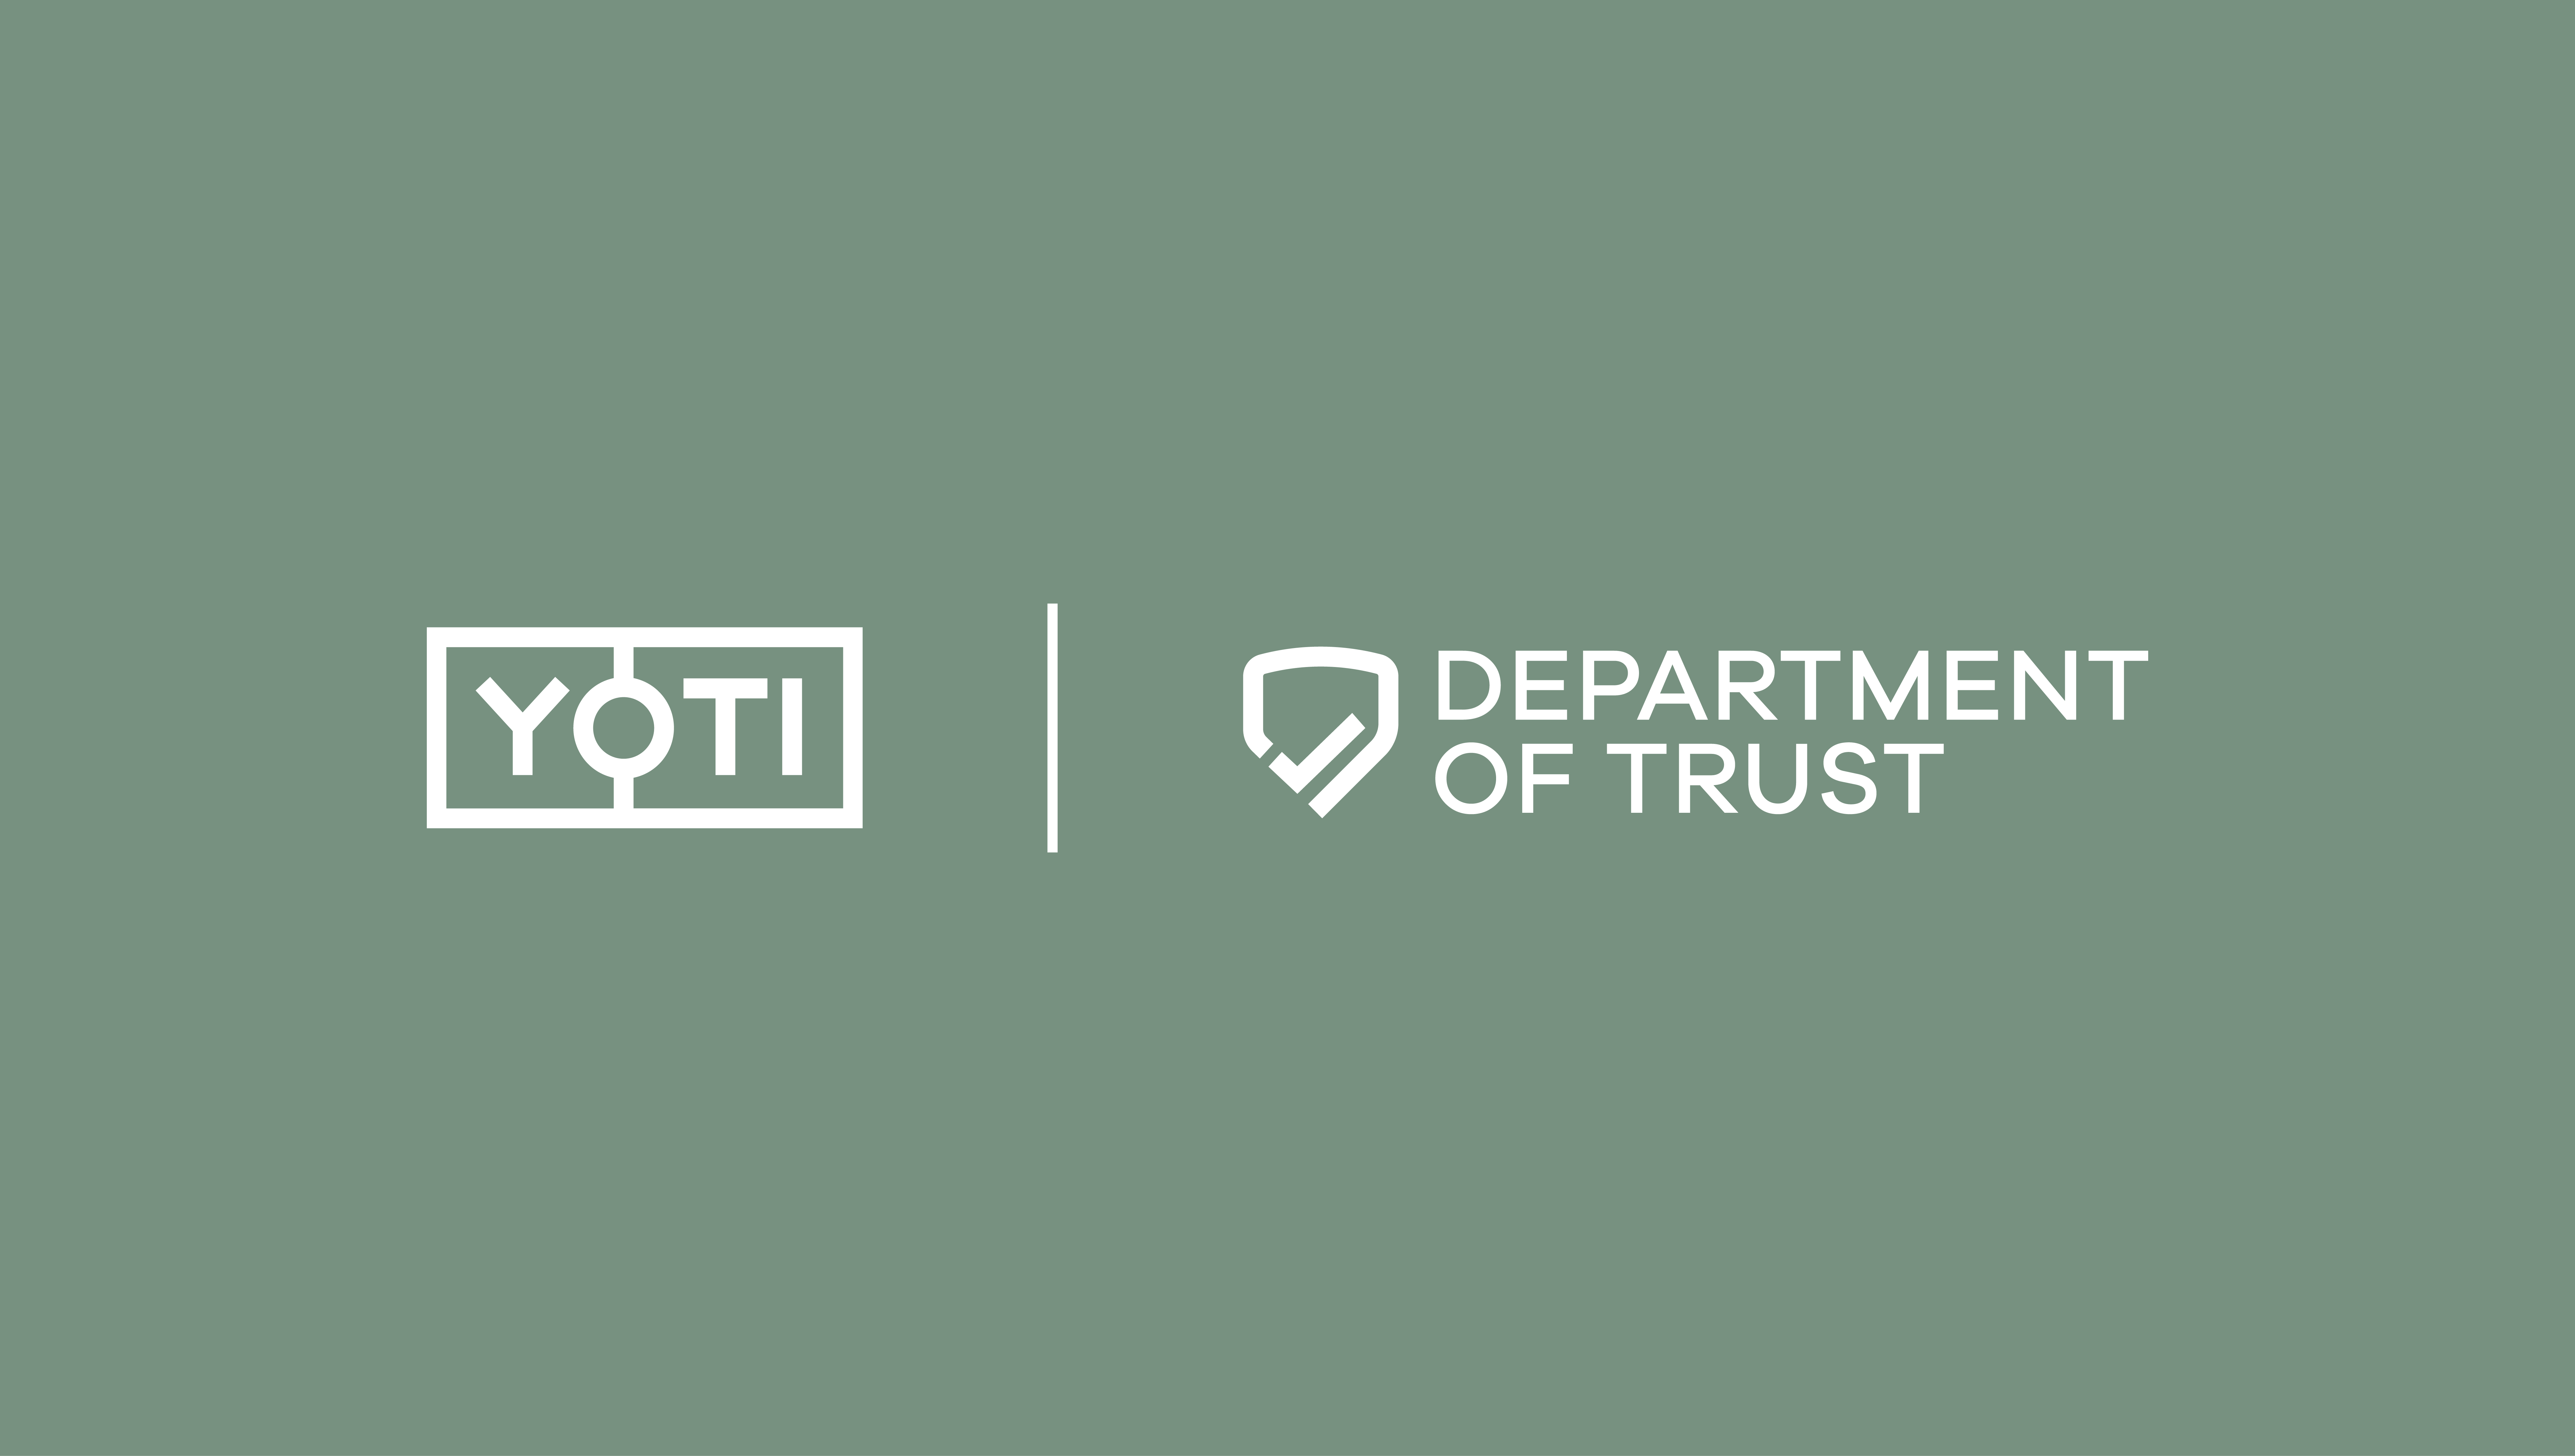 Department of Trust and Yoti introduce one-click affordability and identity verification